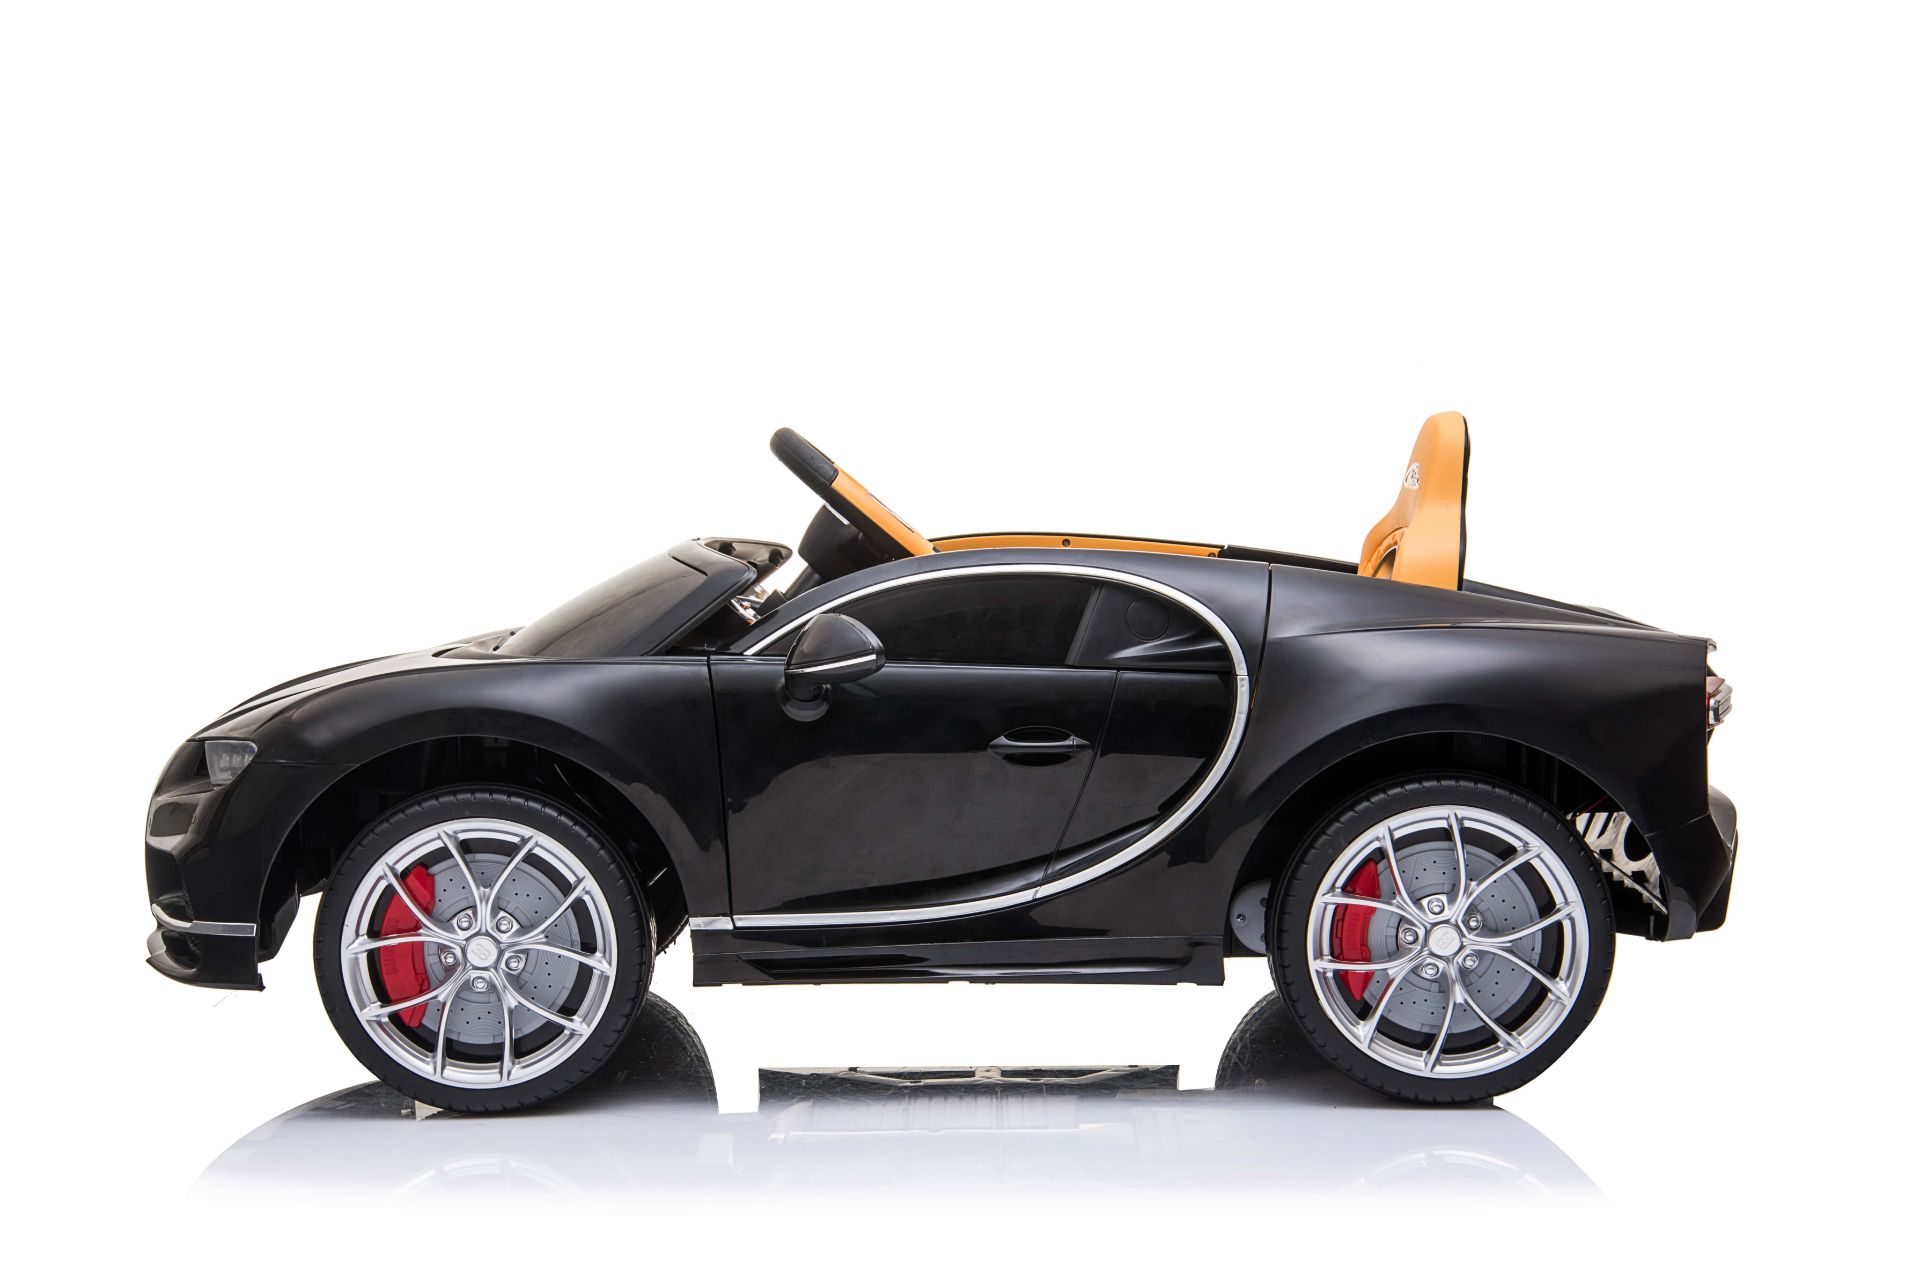 RIDE ON FULLY LICENCED BUGATTI CHIRON 12V WITH PARENTAL REMOTE CONTROL - BLACK - Image 6 of 7